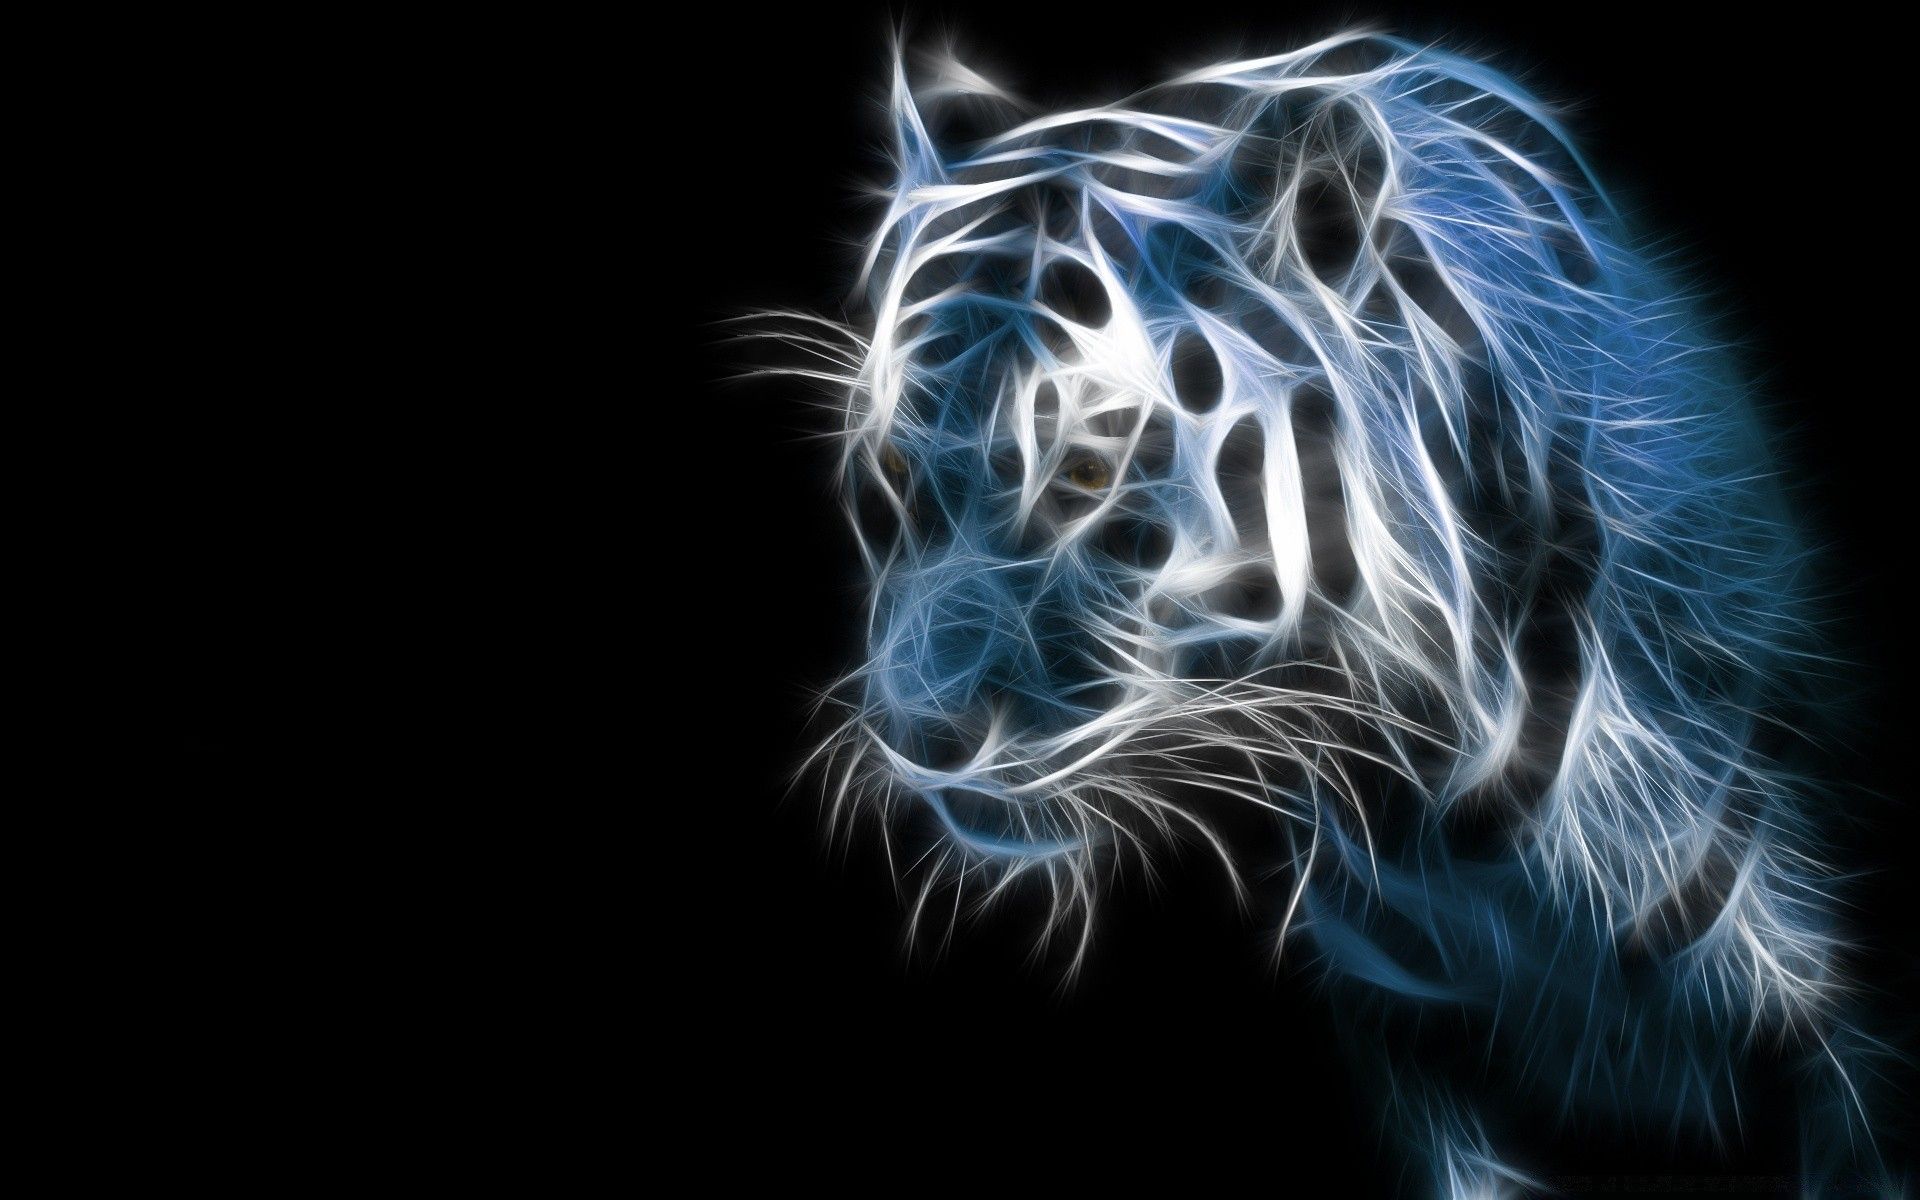  Black  Tiger  Android  Wallpapers  Wallpaper  Cave